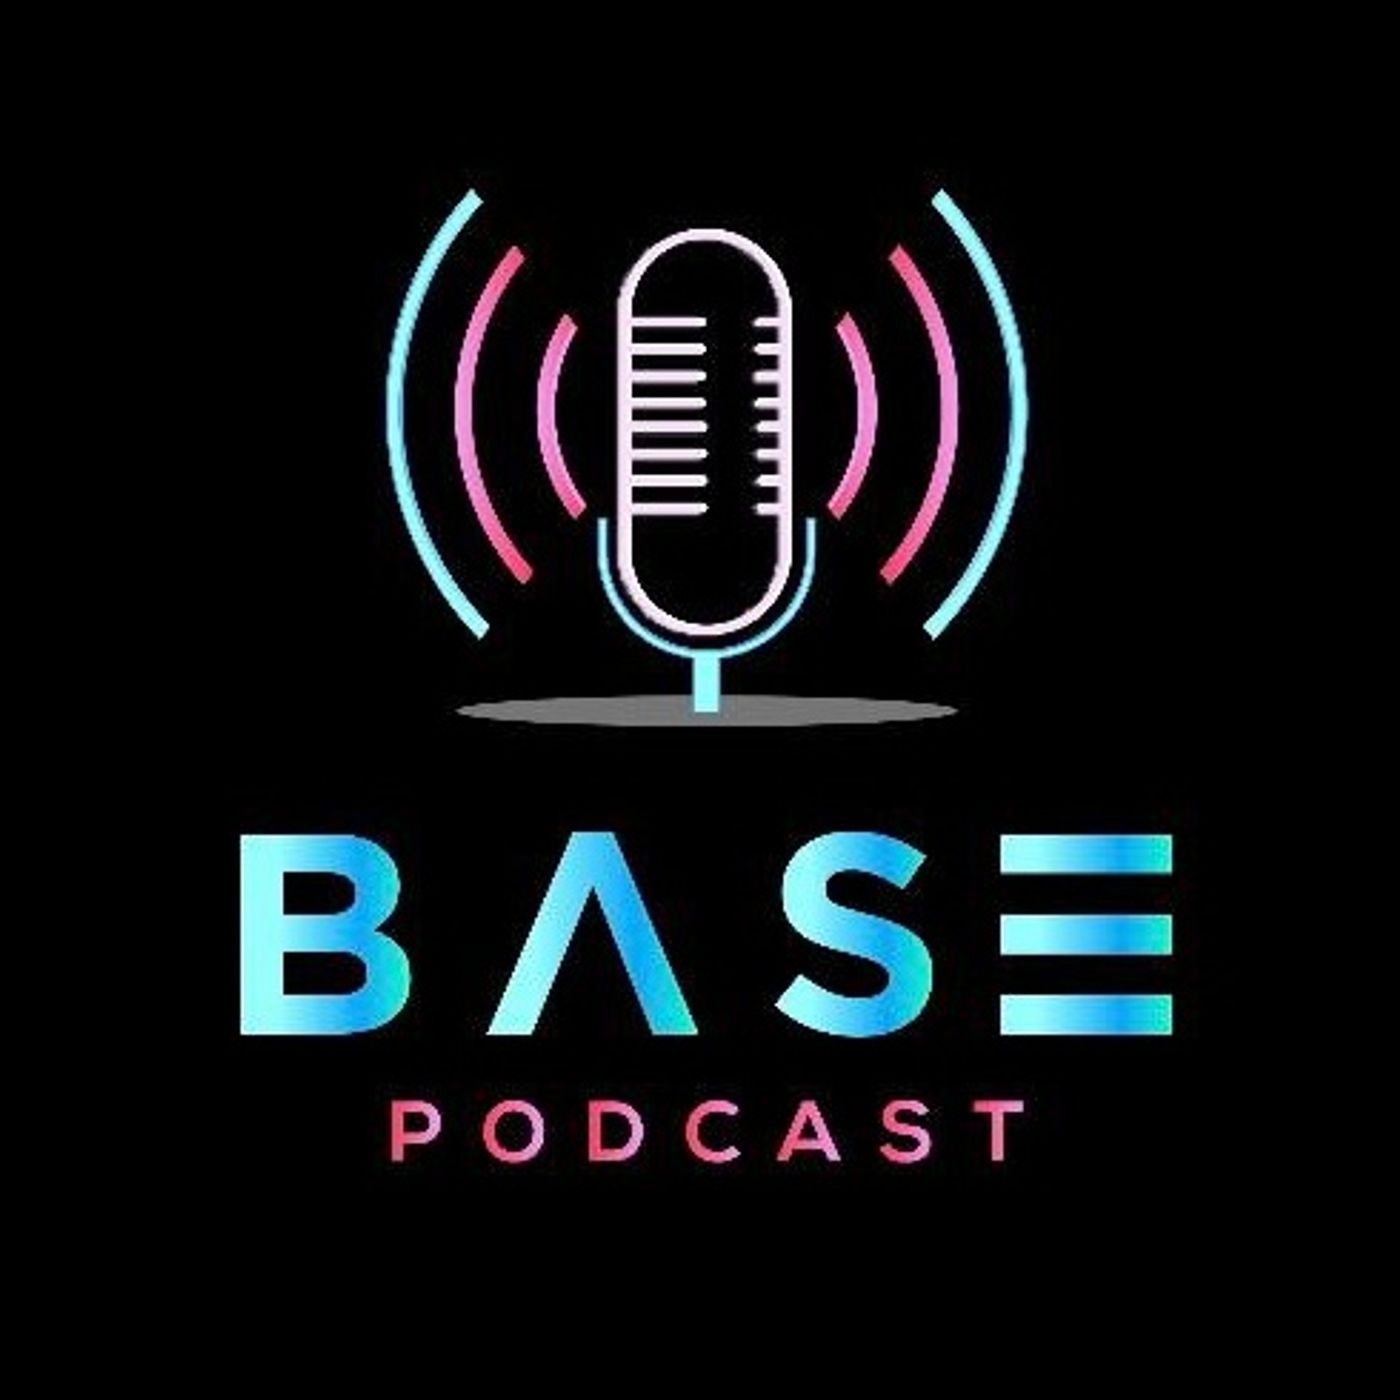 BASE Podcast #12 - The Commercial Industry - Is the Casting System Broken?